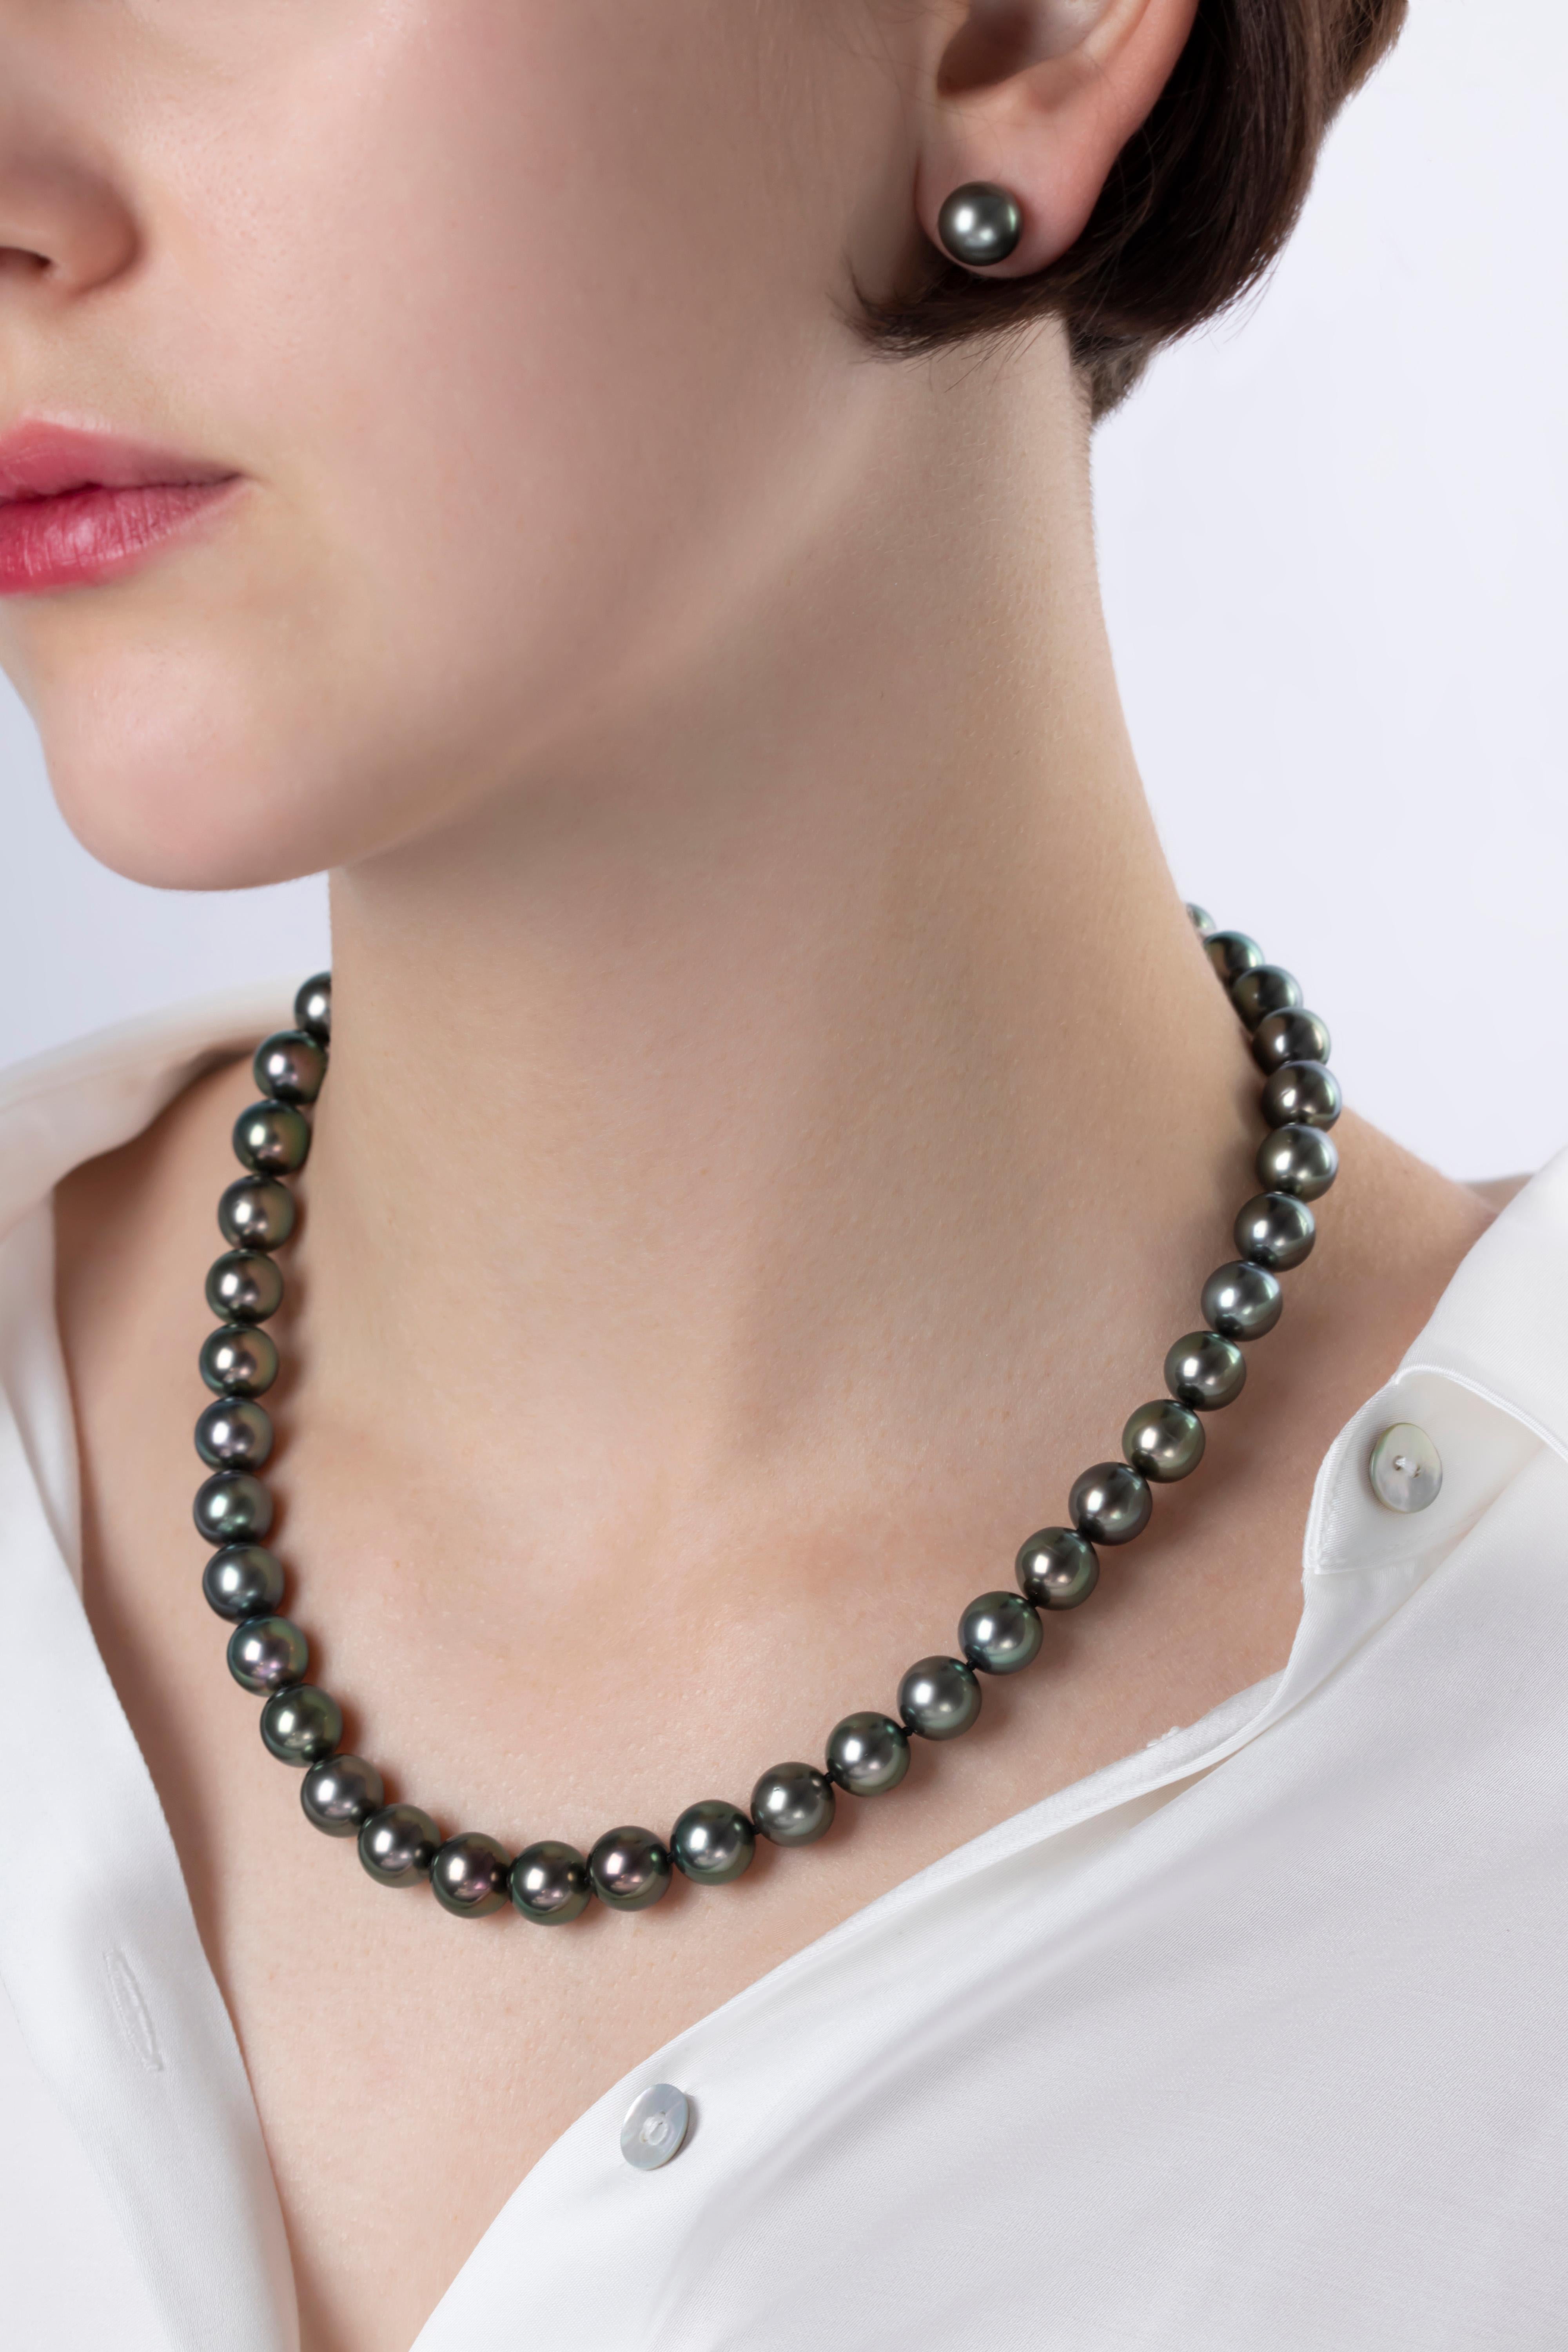 A classic necklace style formed good quality Tahitian pearls and strung onto an 18K White Gold clasp. Suitable for daily use or formal events, this necklace will add a sophisticated twist to any outfit. Style with matching studs and other Tahitian